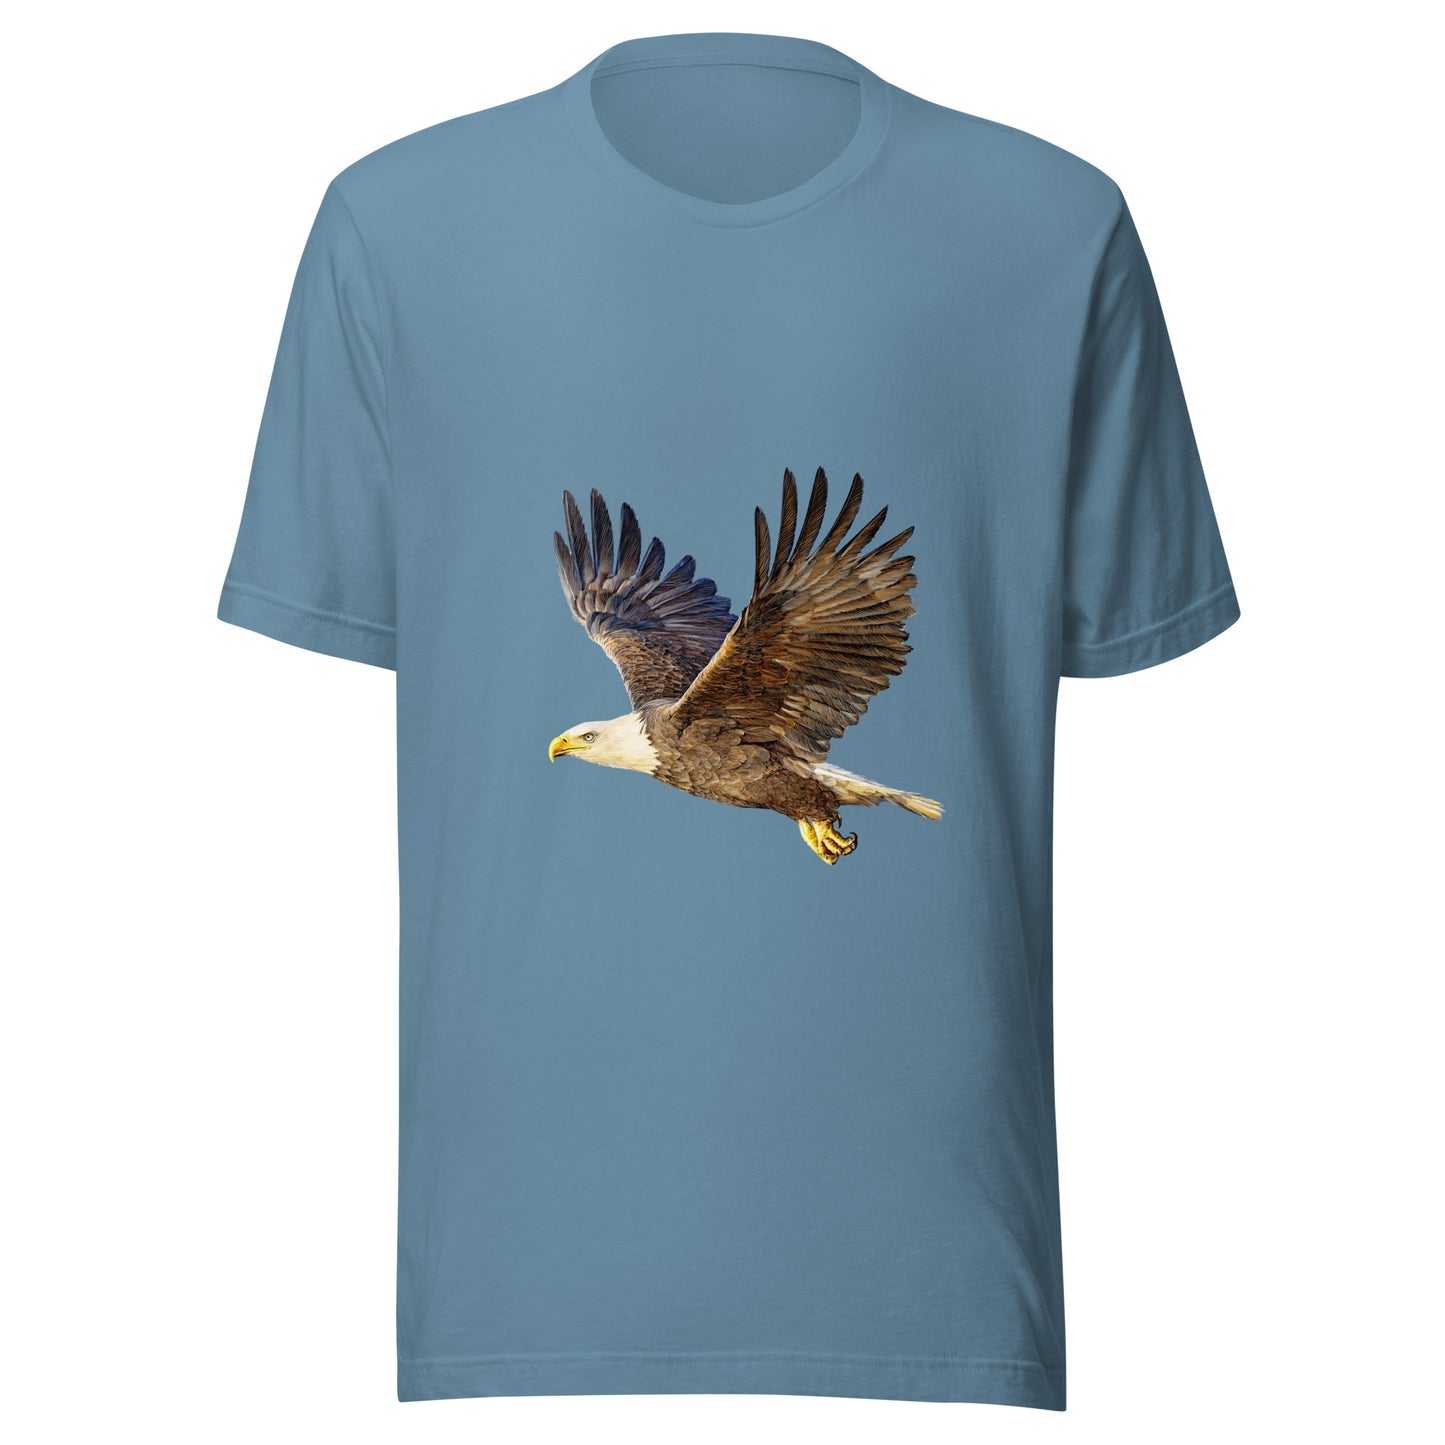 Women and Men's (Unisex) T-Shirt Printed with a Bald Eagle in Flight